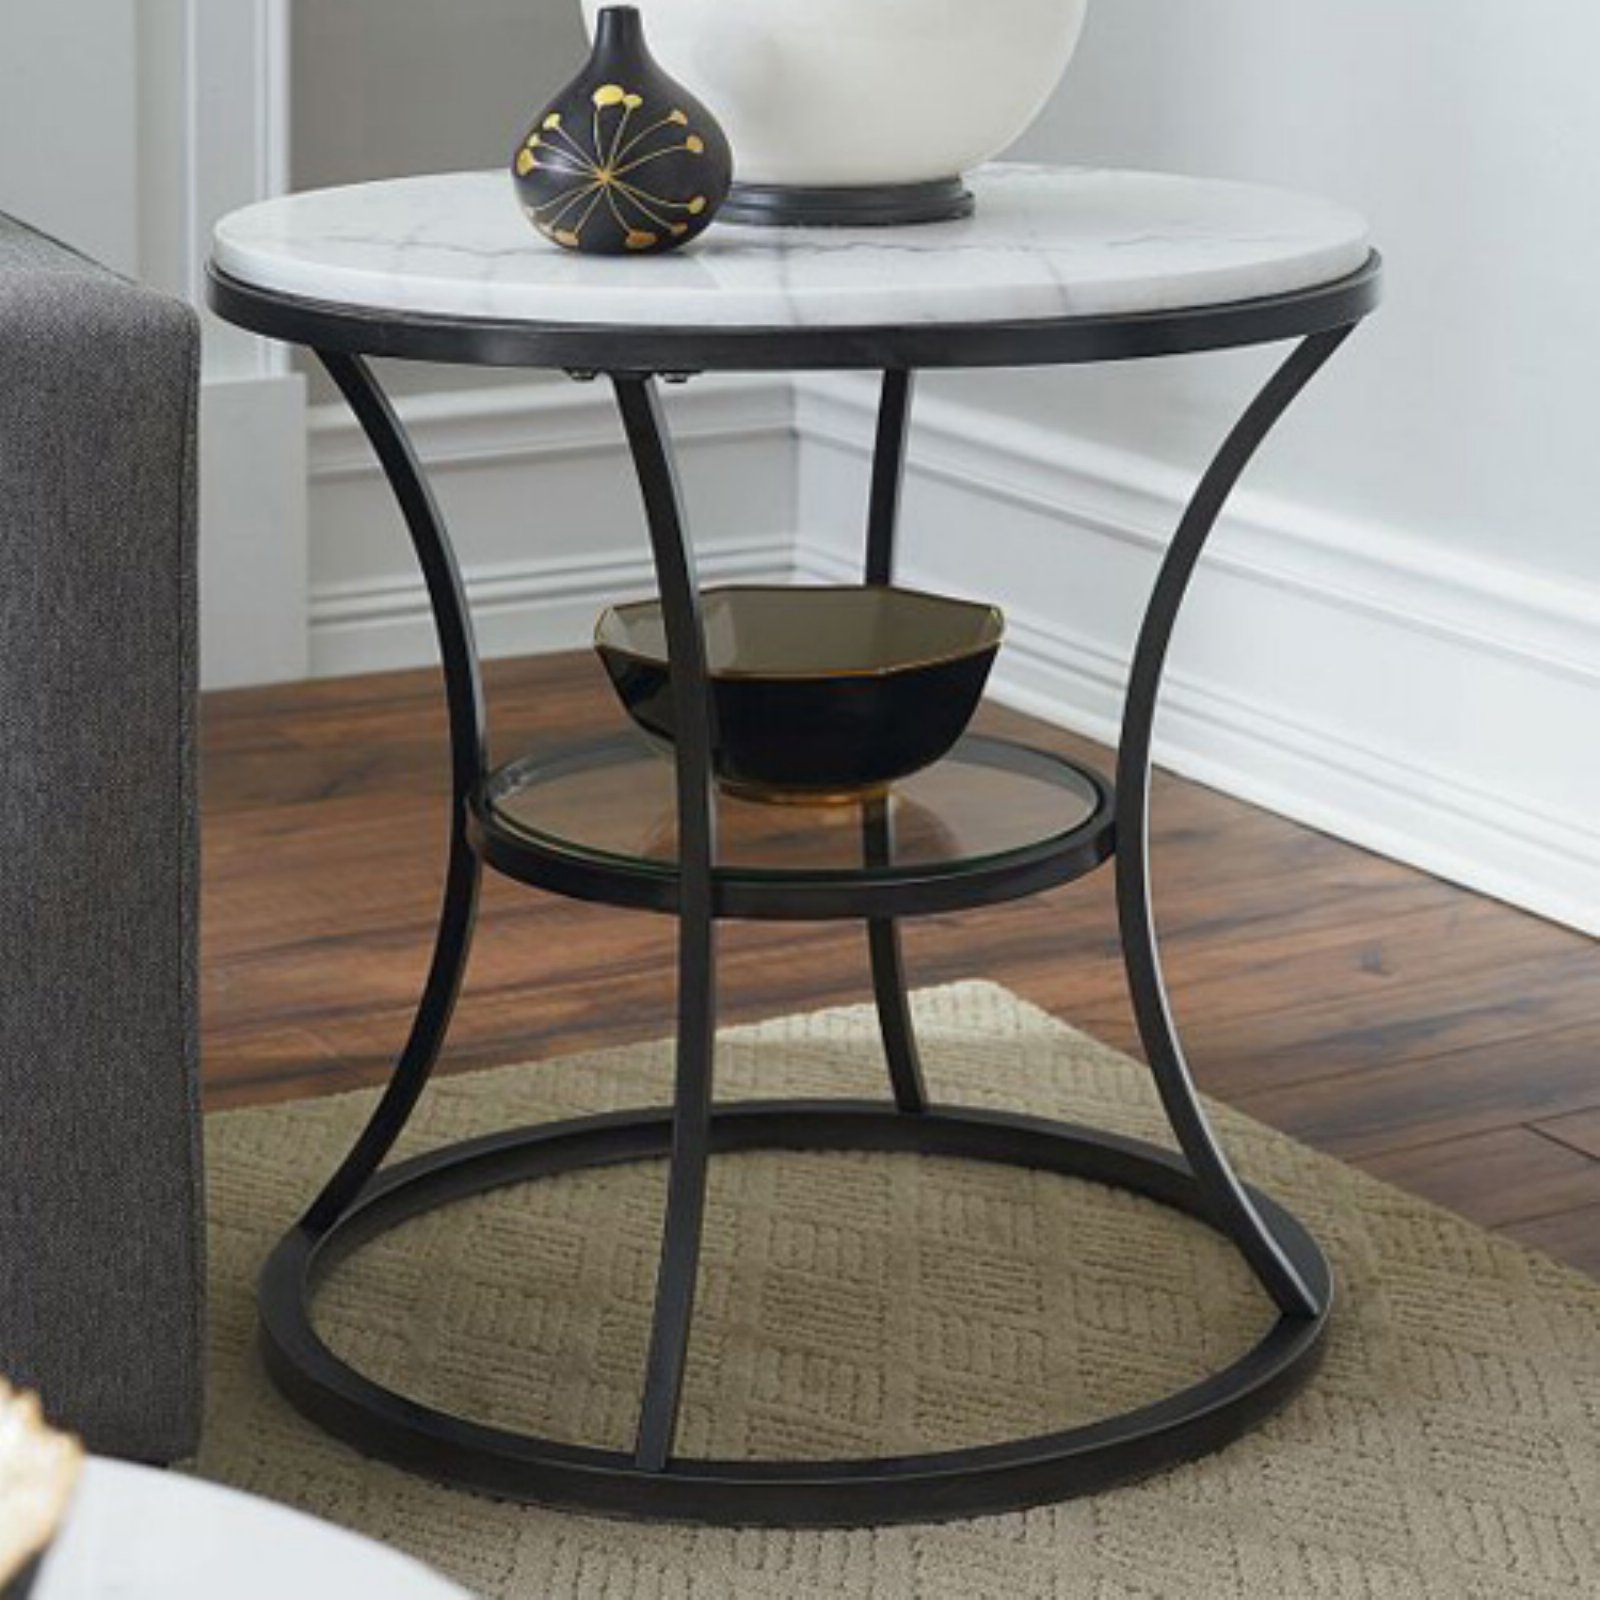 hammary furniture impact round end table products marble glass tables dark brown bedside cabinet rustic side behind the couch ikea old pallet wicker patio storage black ashley